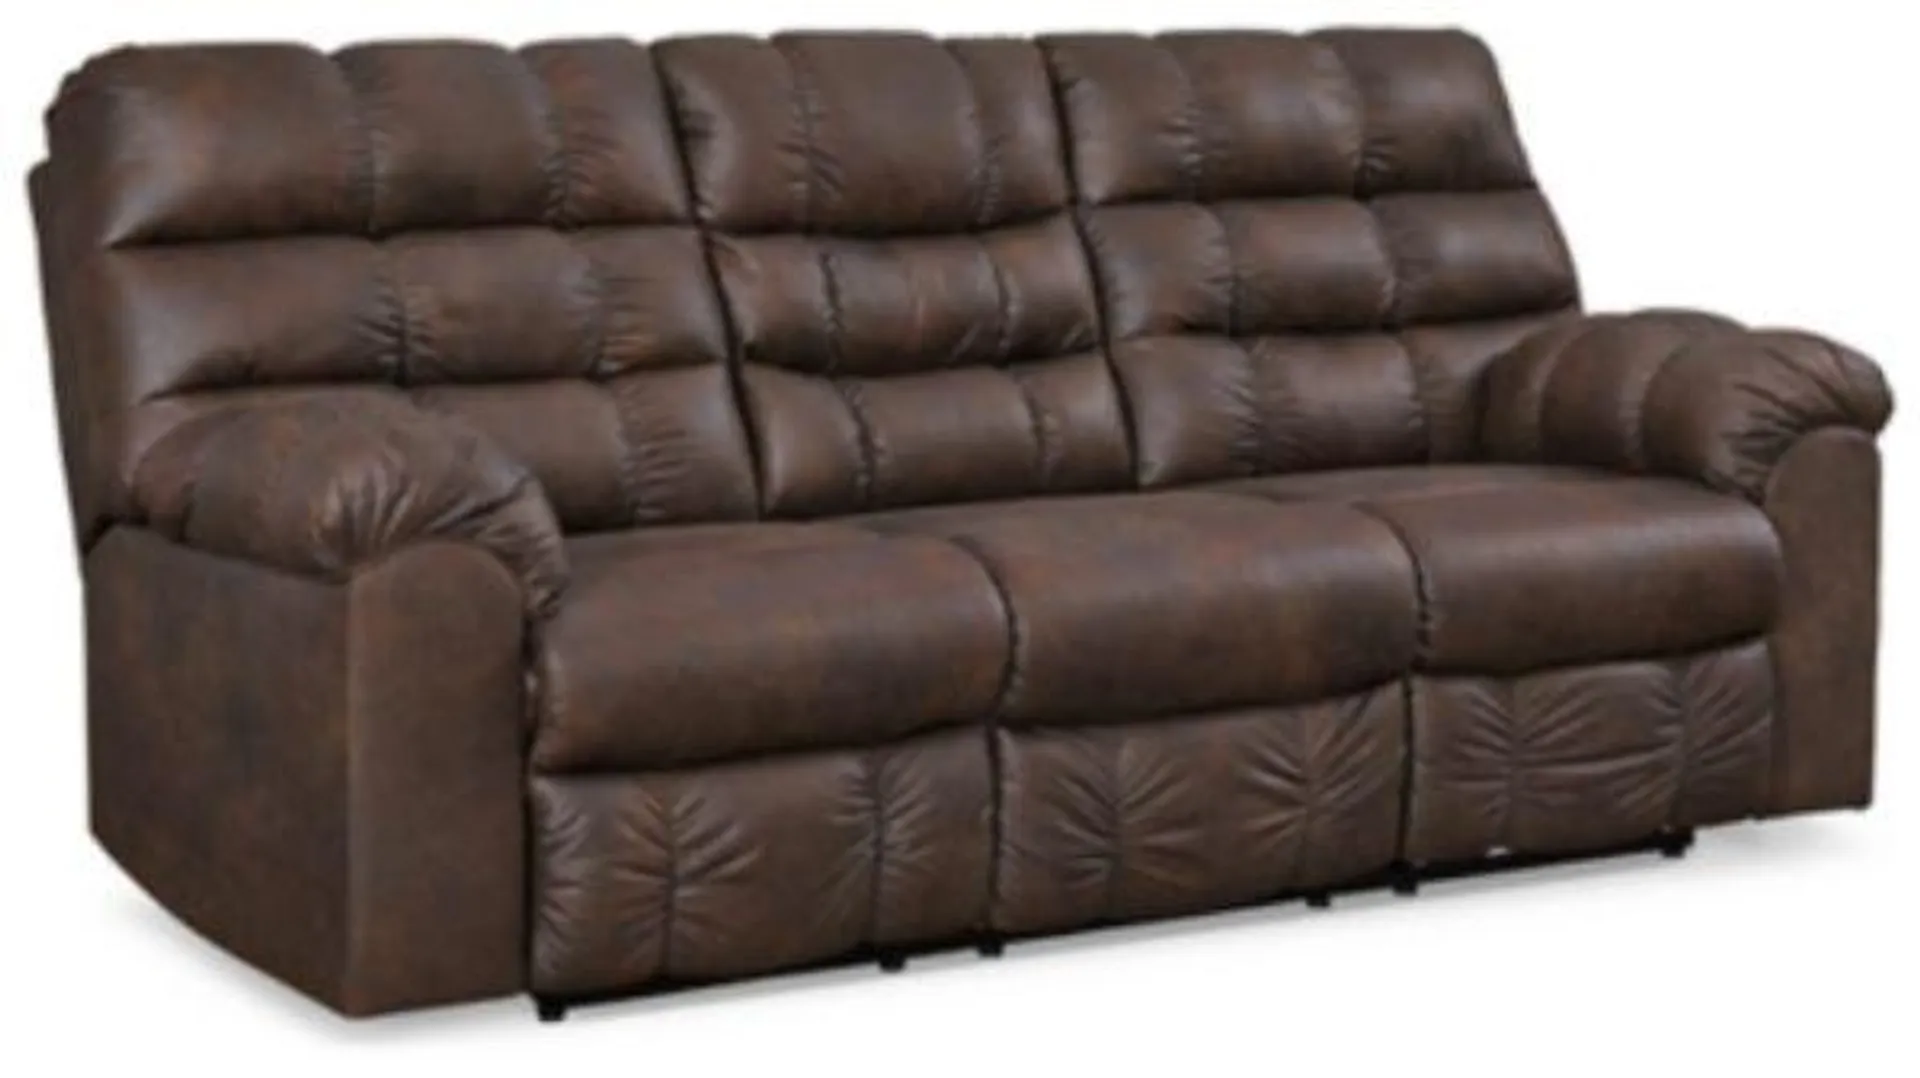 Derwin Brown Reclining Sofa with Drop Down Table